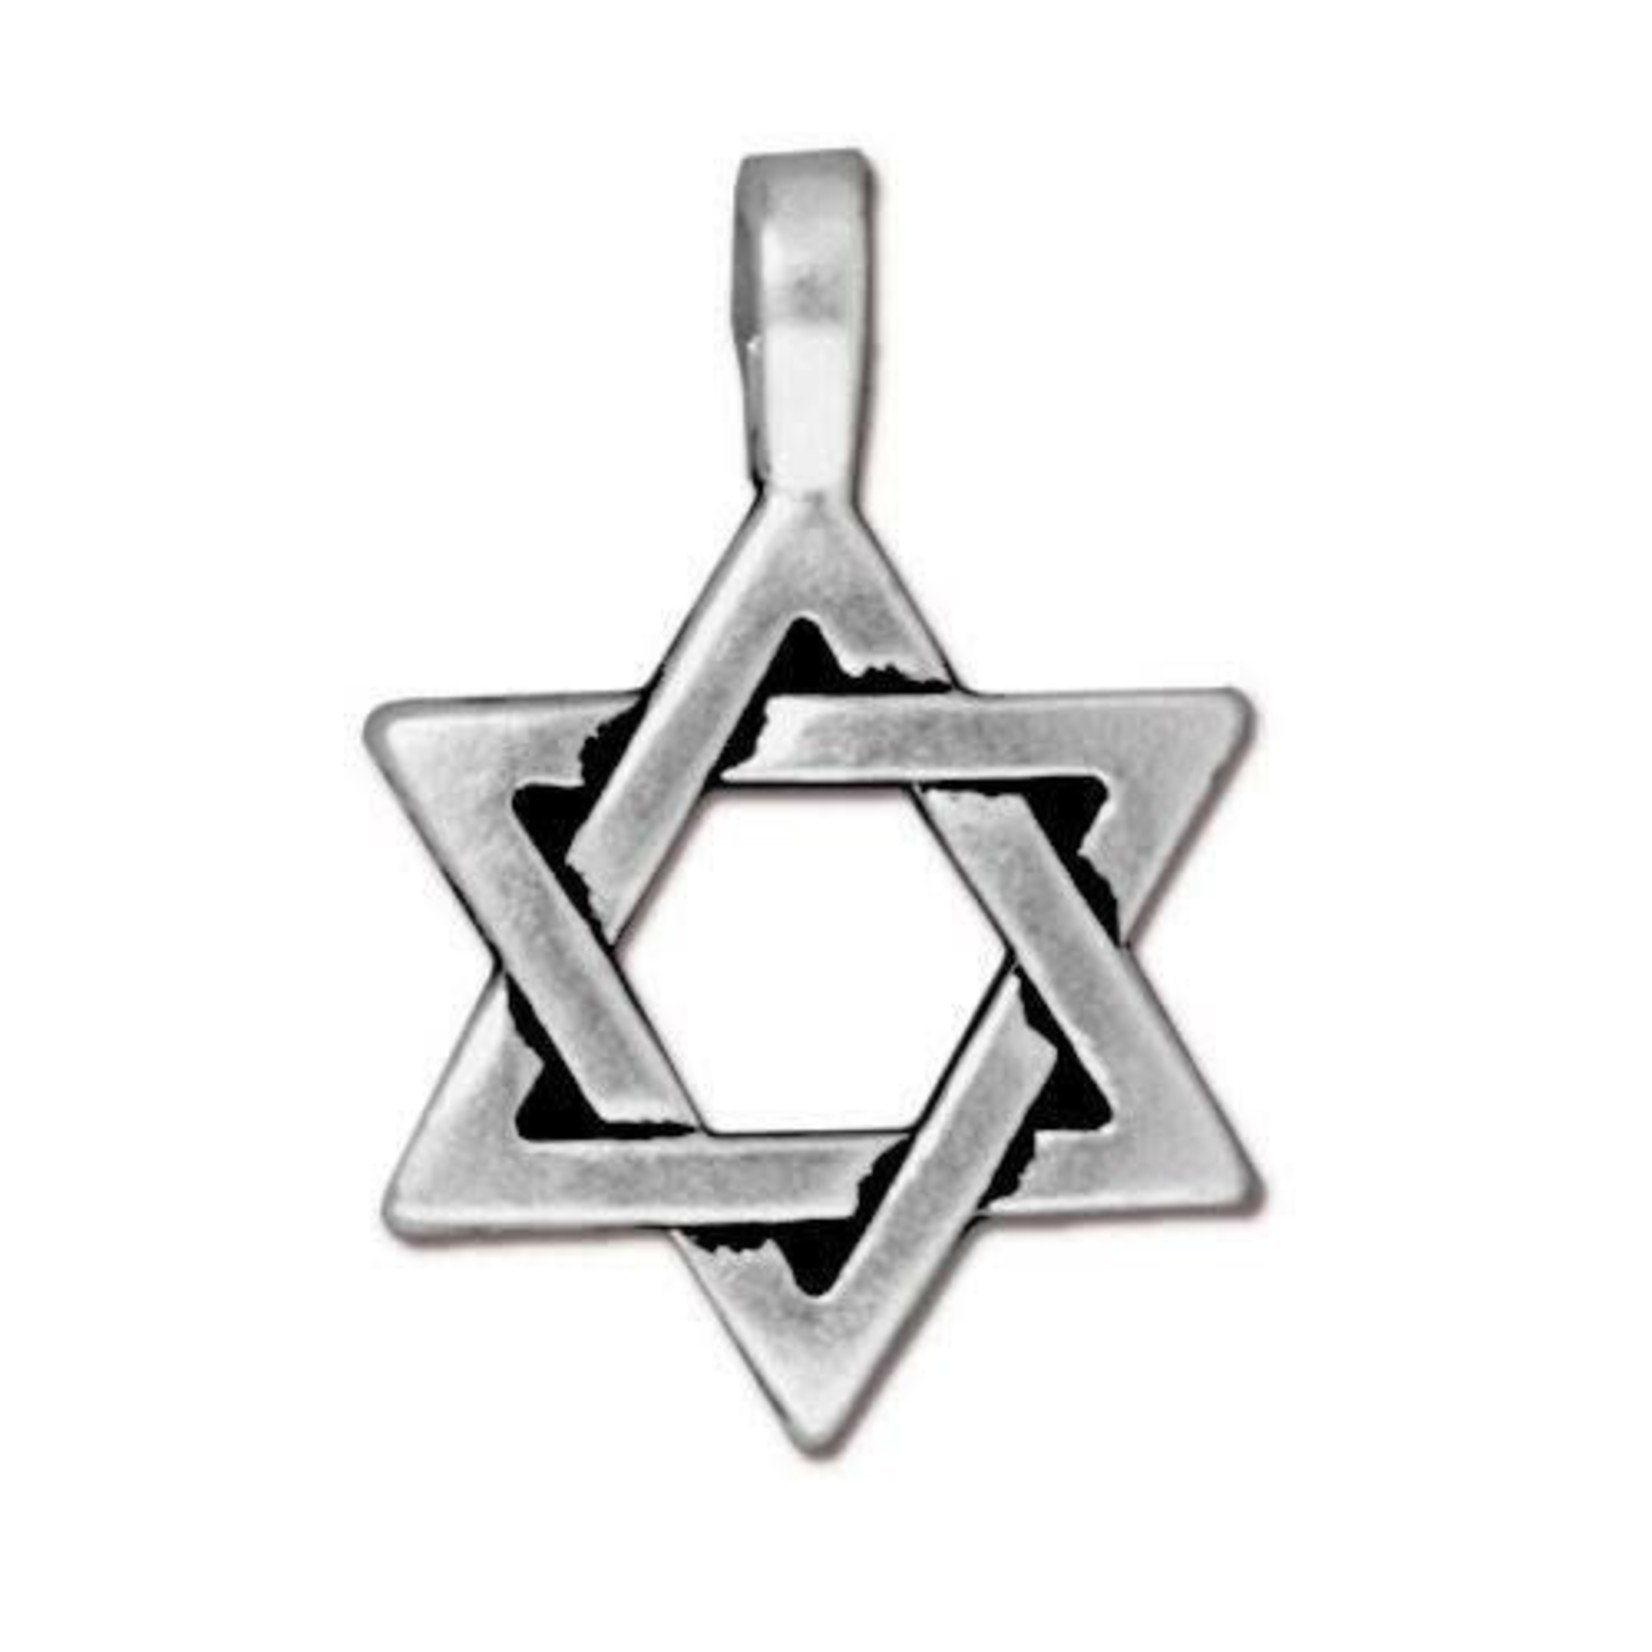 TierraCast Tierracast Antique Silver Plated Large Star of David Charm